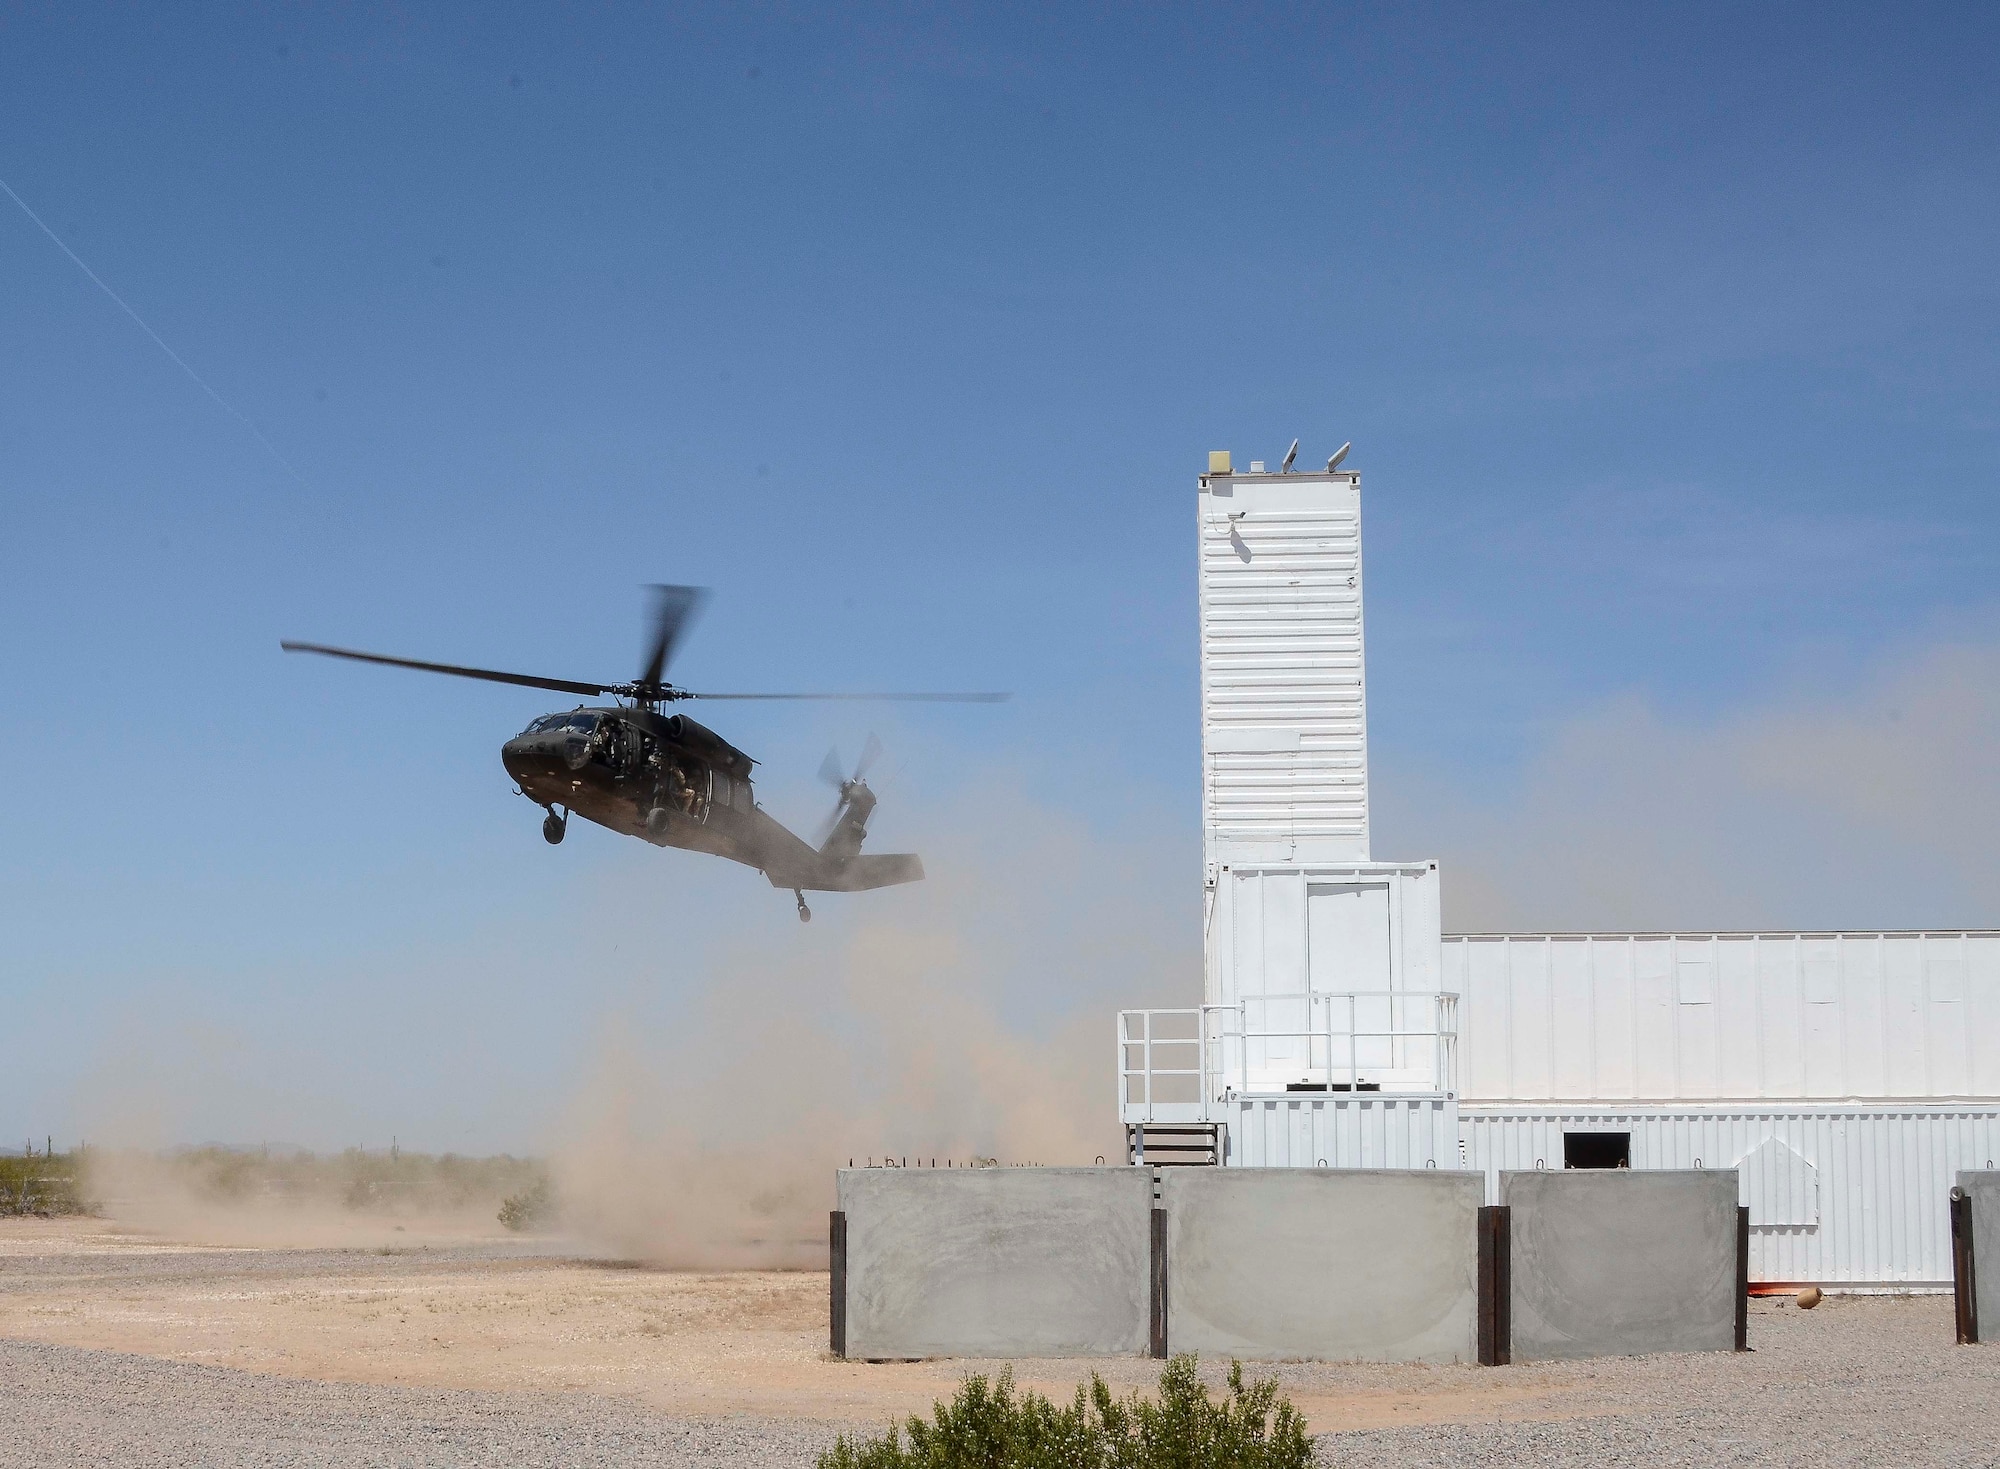 An Arizona Army National Guard 2-285 UH-60 Black Hawk helicopter prepares to land during a training mission in Exercise ANGEL THUNDER on May 16, 2014 at the Florence Military Reservation, Ariz. ANGEL THUNDER 2014 is the largest and most realistic joint service, multinational, interagency combat search and rescue exercise designed to provide training for personnel recovery assets using a variety of scenarios to simulate deployment conditions and contingencies. Personnel recovery forces will train through the full spectrum of personnel recovery capabilities with ground recovery personnel, air assets, and interagency teams. (U.S. Air Force photo by Staff Sgt. Adam Grant/Released)